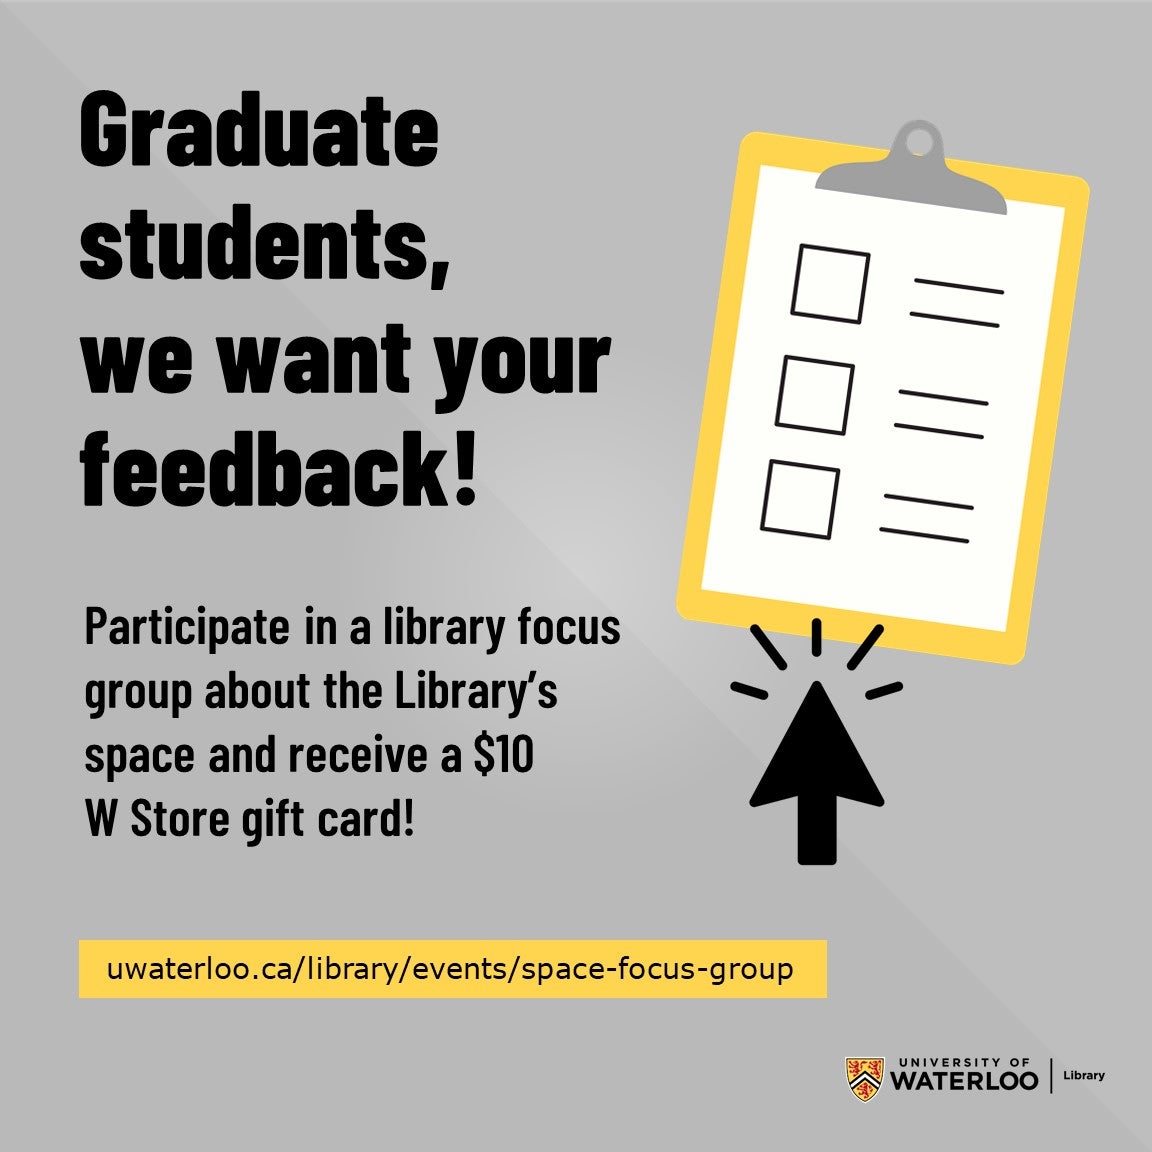 Graduate students, we want your feedback! Participate in a library focus group about the Library’s space and win.